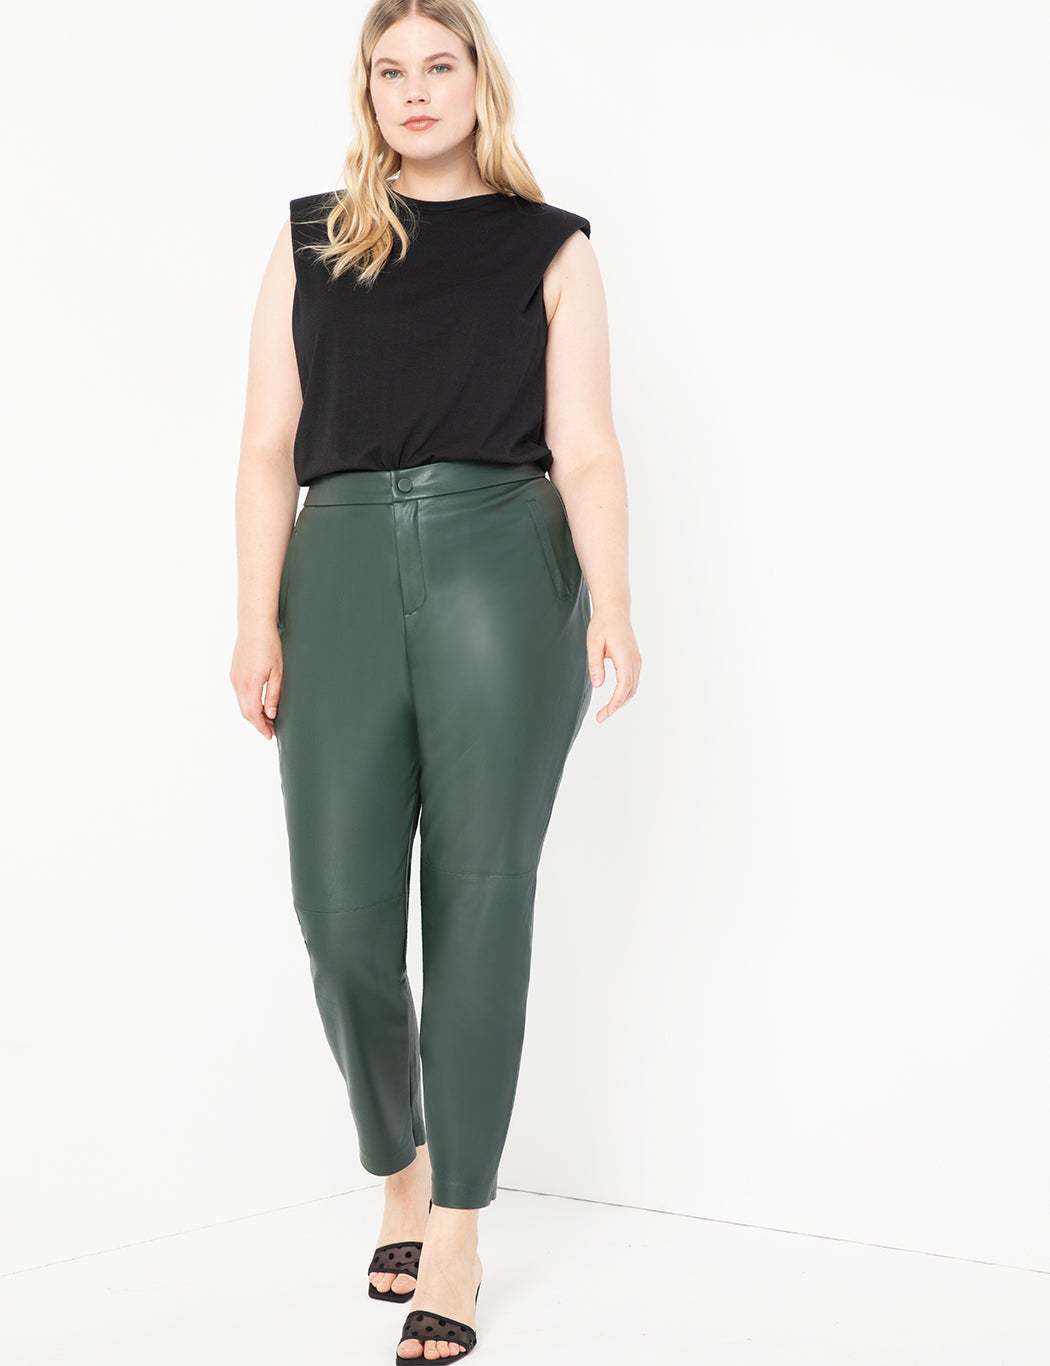 Are the @Aritzia Melina pants worth the hype? Tap the 🔗 for a deep di